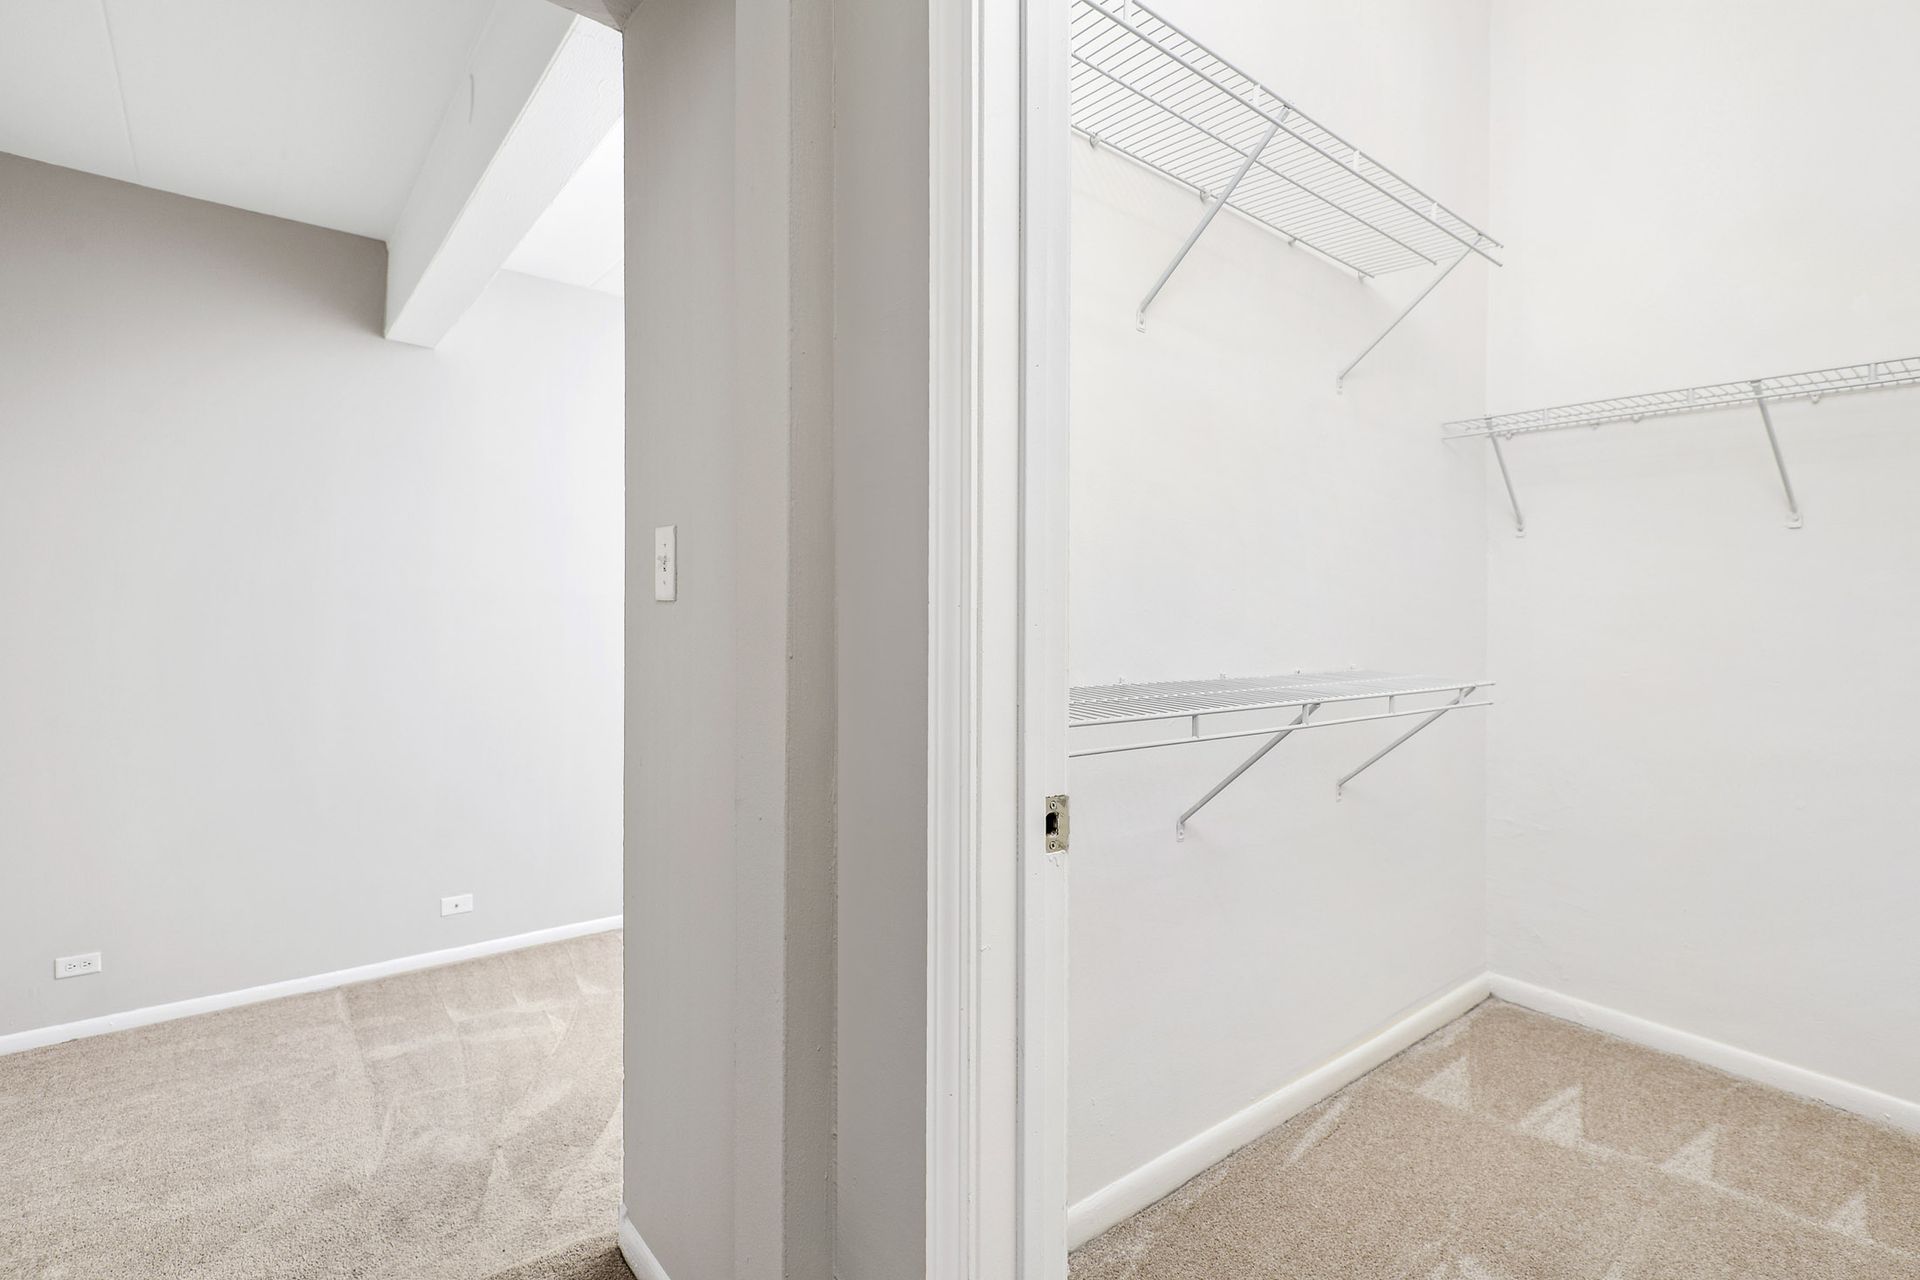 Walk-in closet at Reside on Wellington in Chicago, IL.